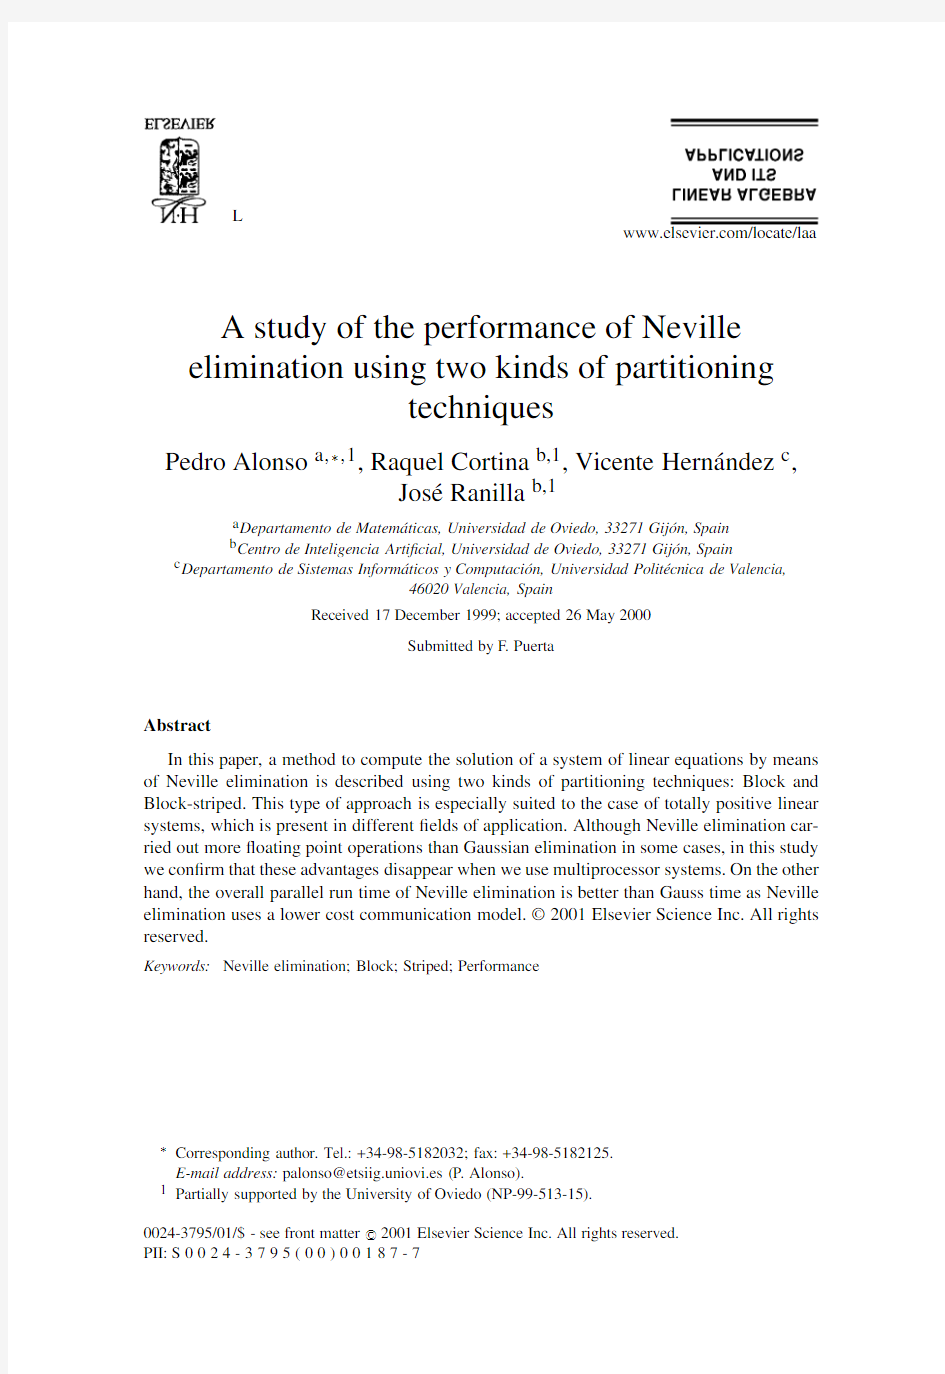 A study of the performance of Neville elimination